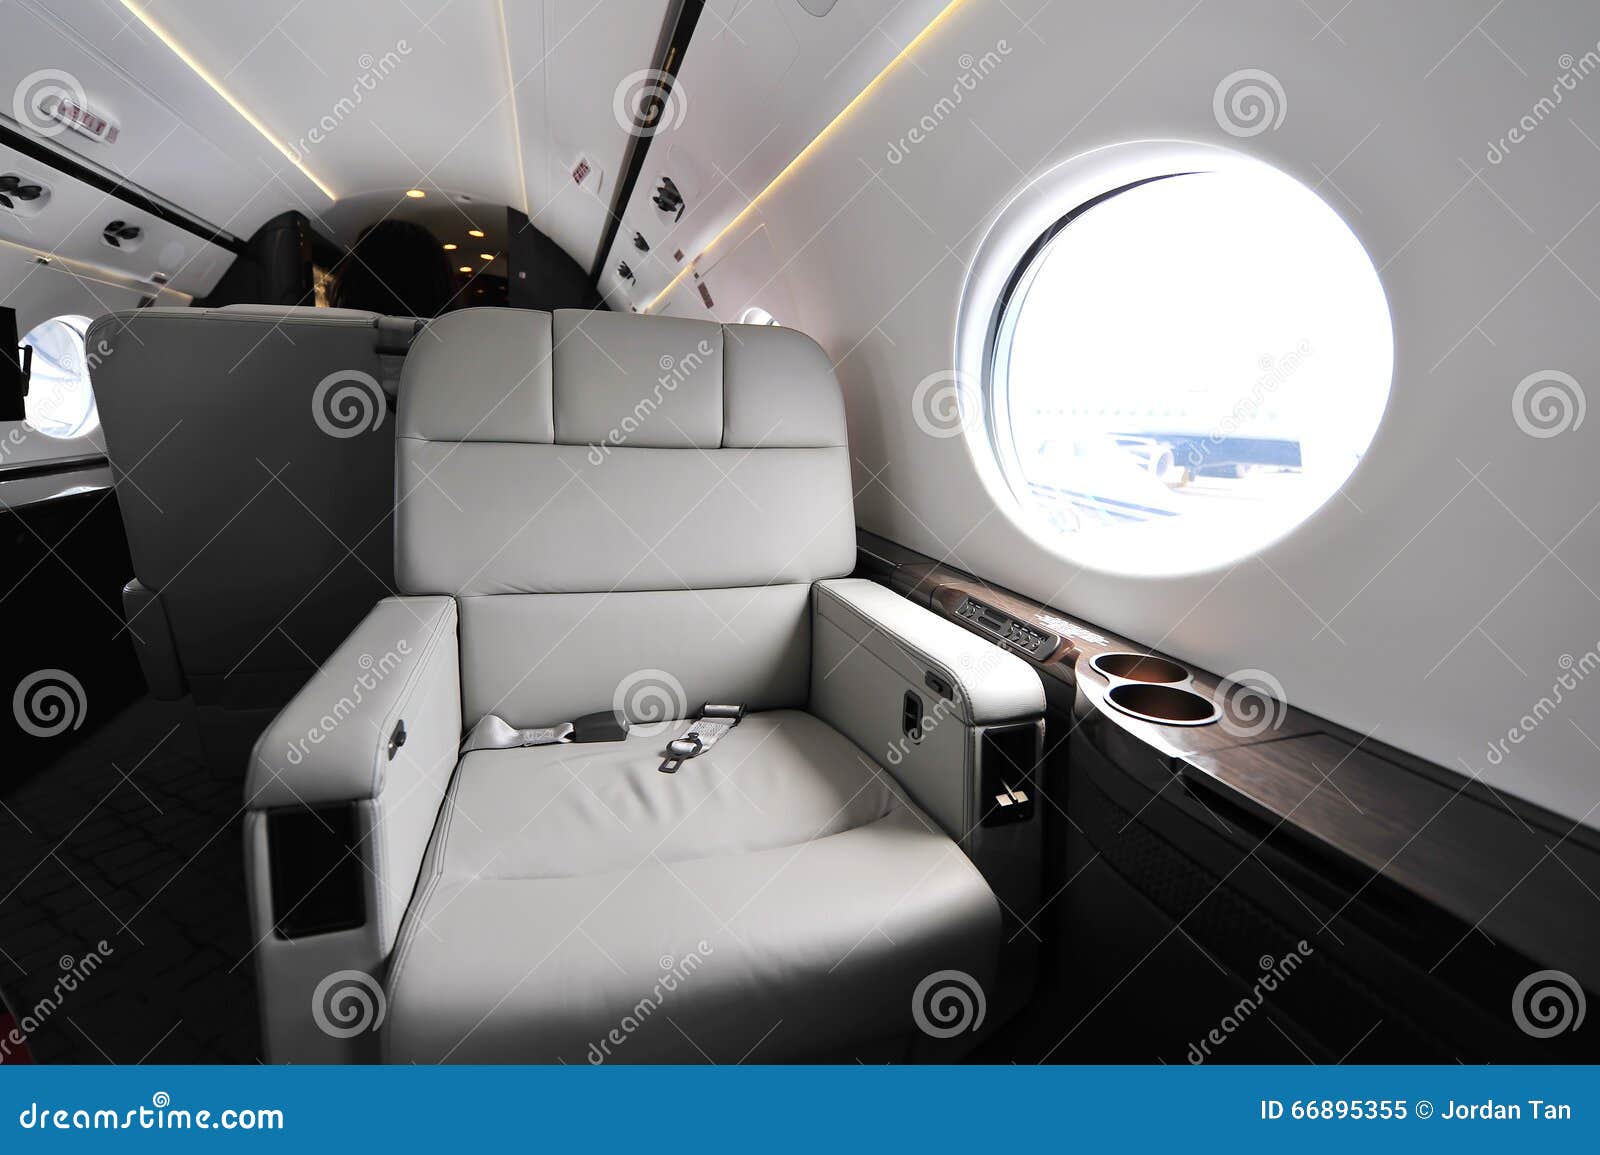 Luxurious Interior Of Gulfstream G450 Executive Jet At